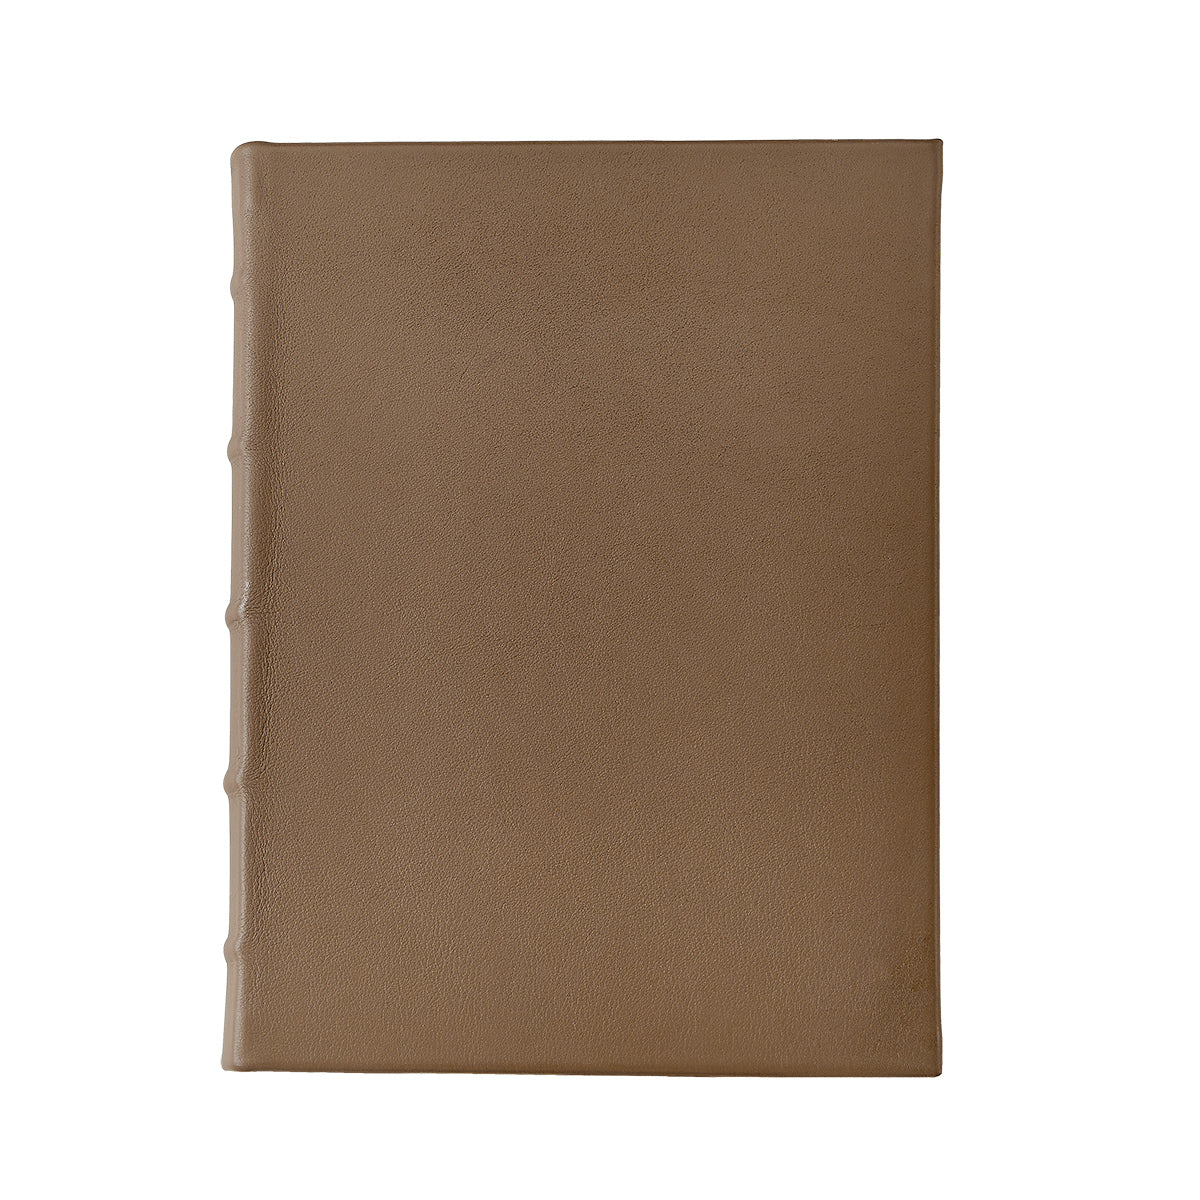 Graphic Image 9 Hardcover Journal Taupe Traditional Leather